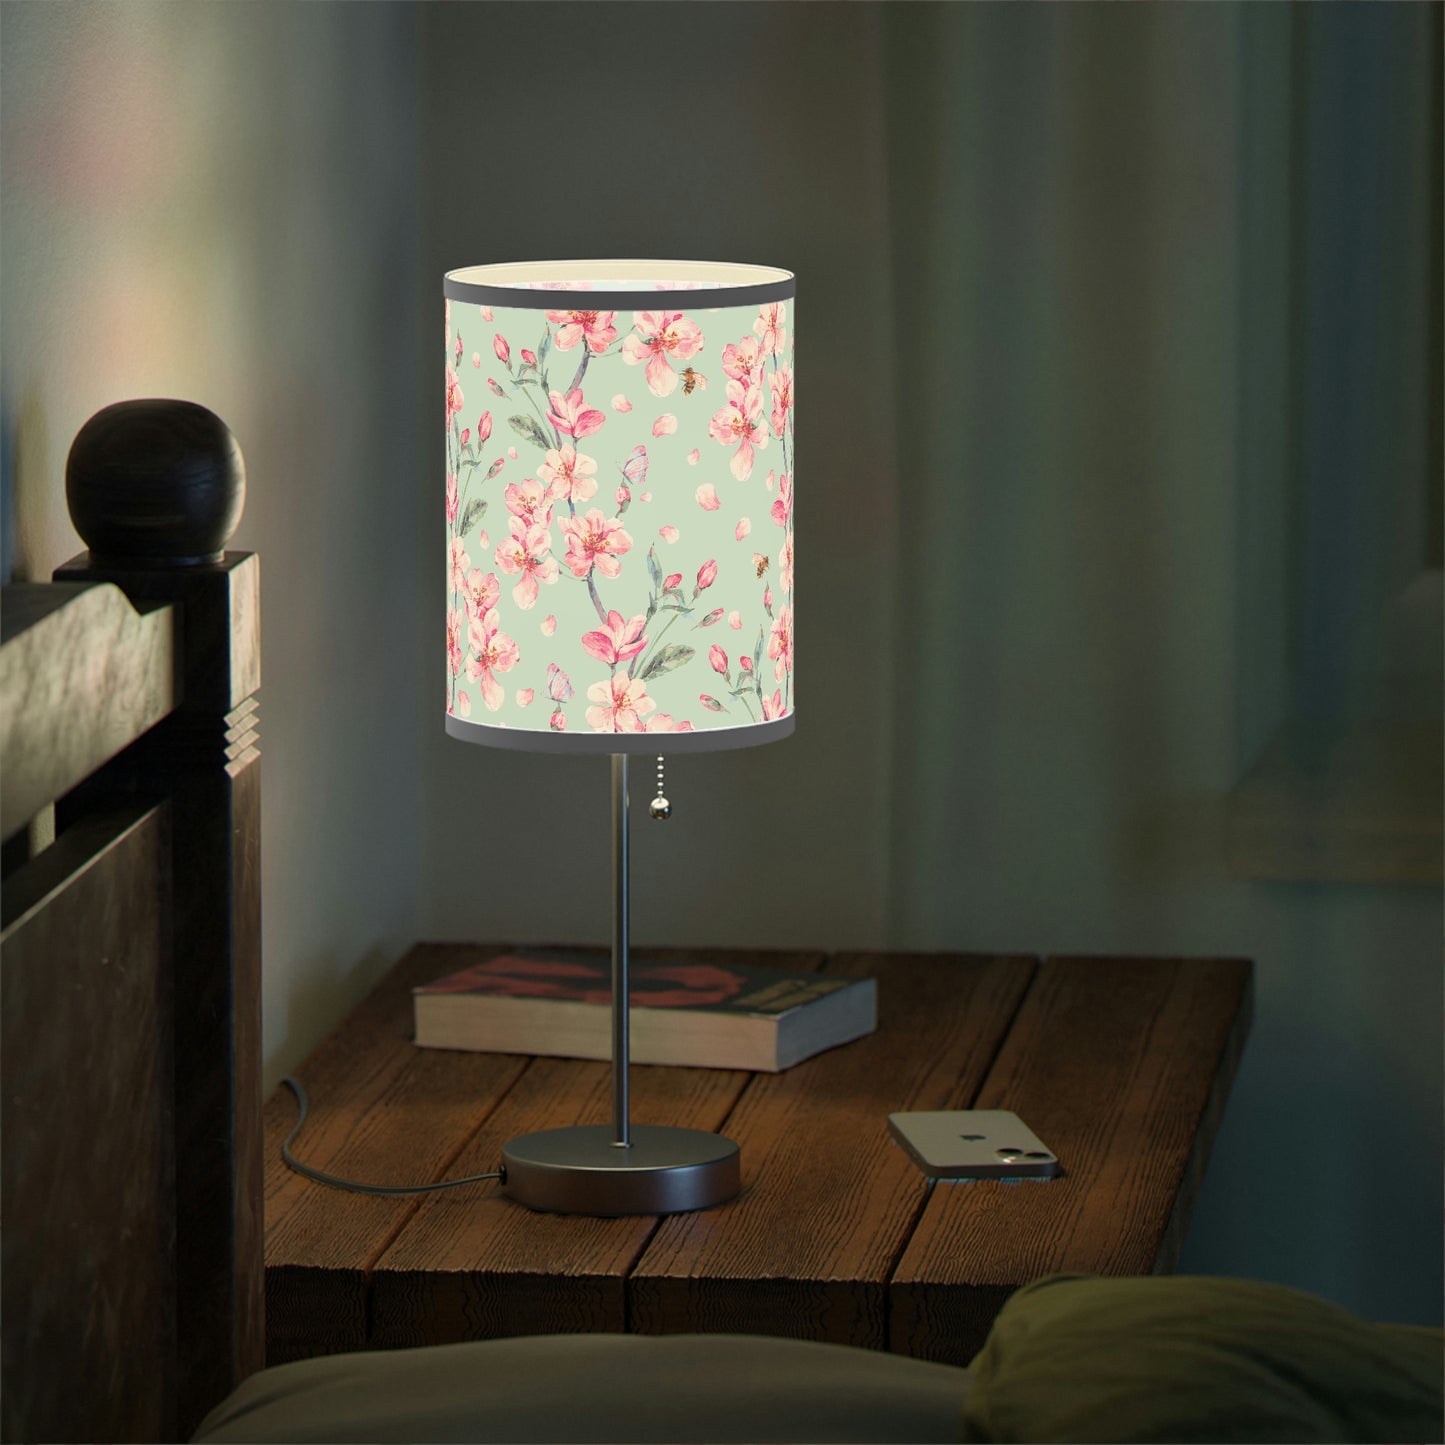 Cherry Blossoms and Honey Bees Table Lamp